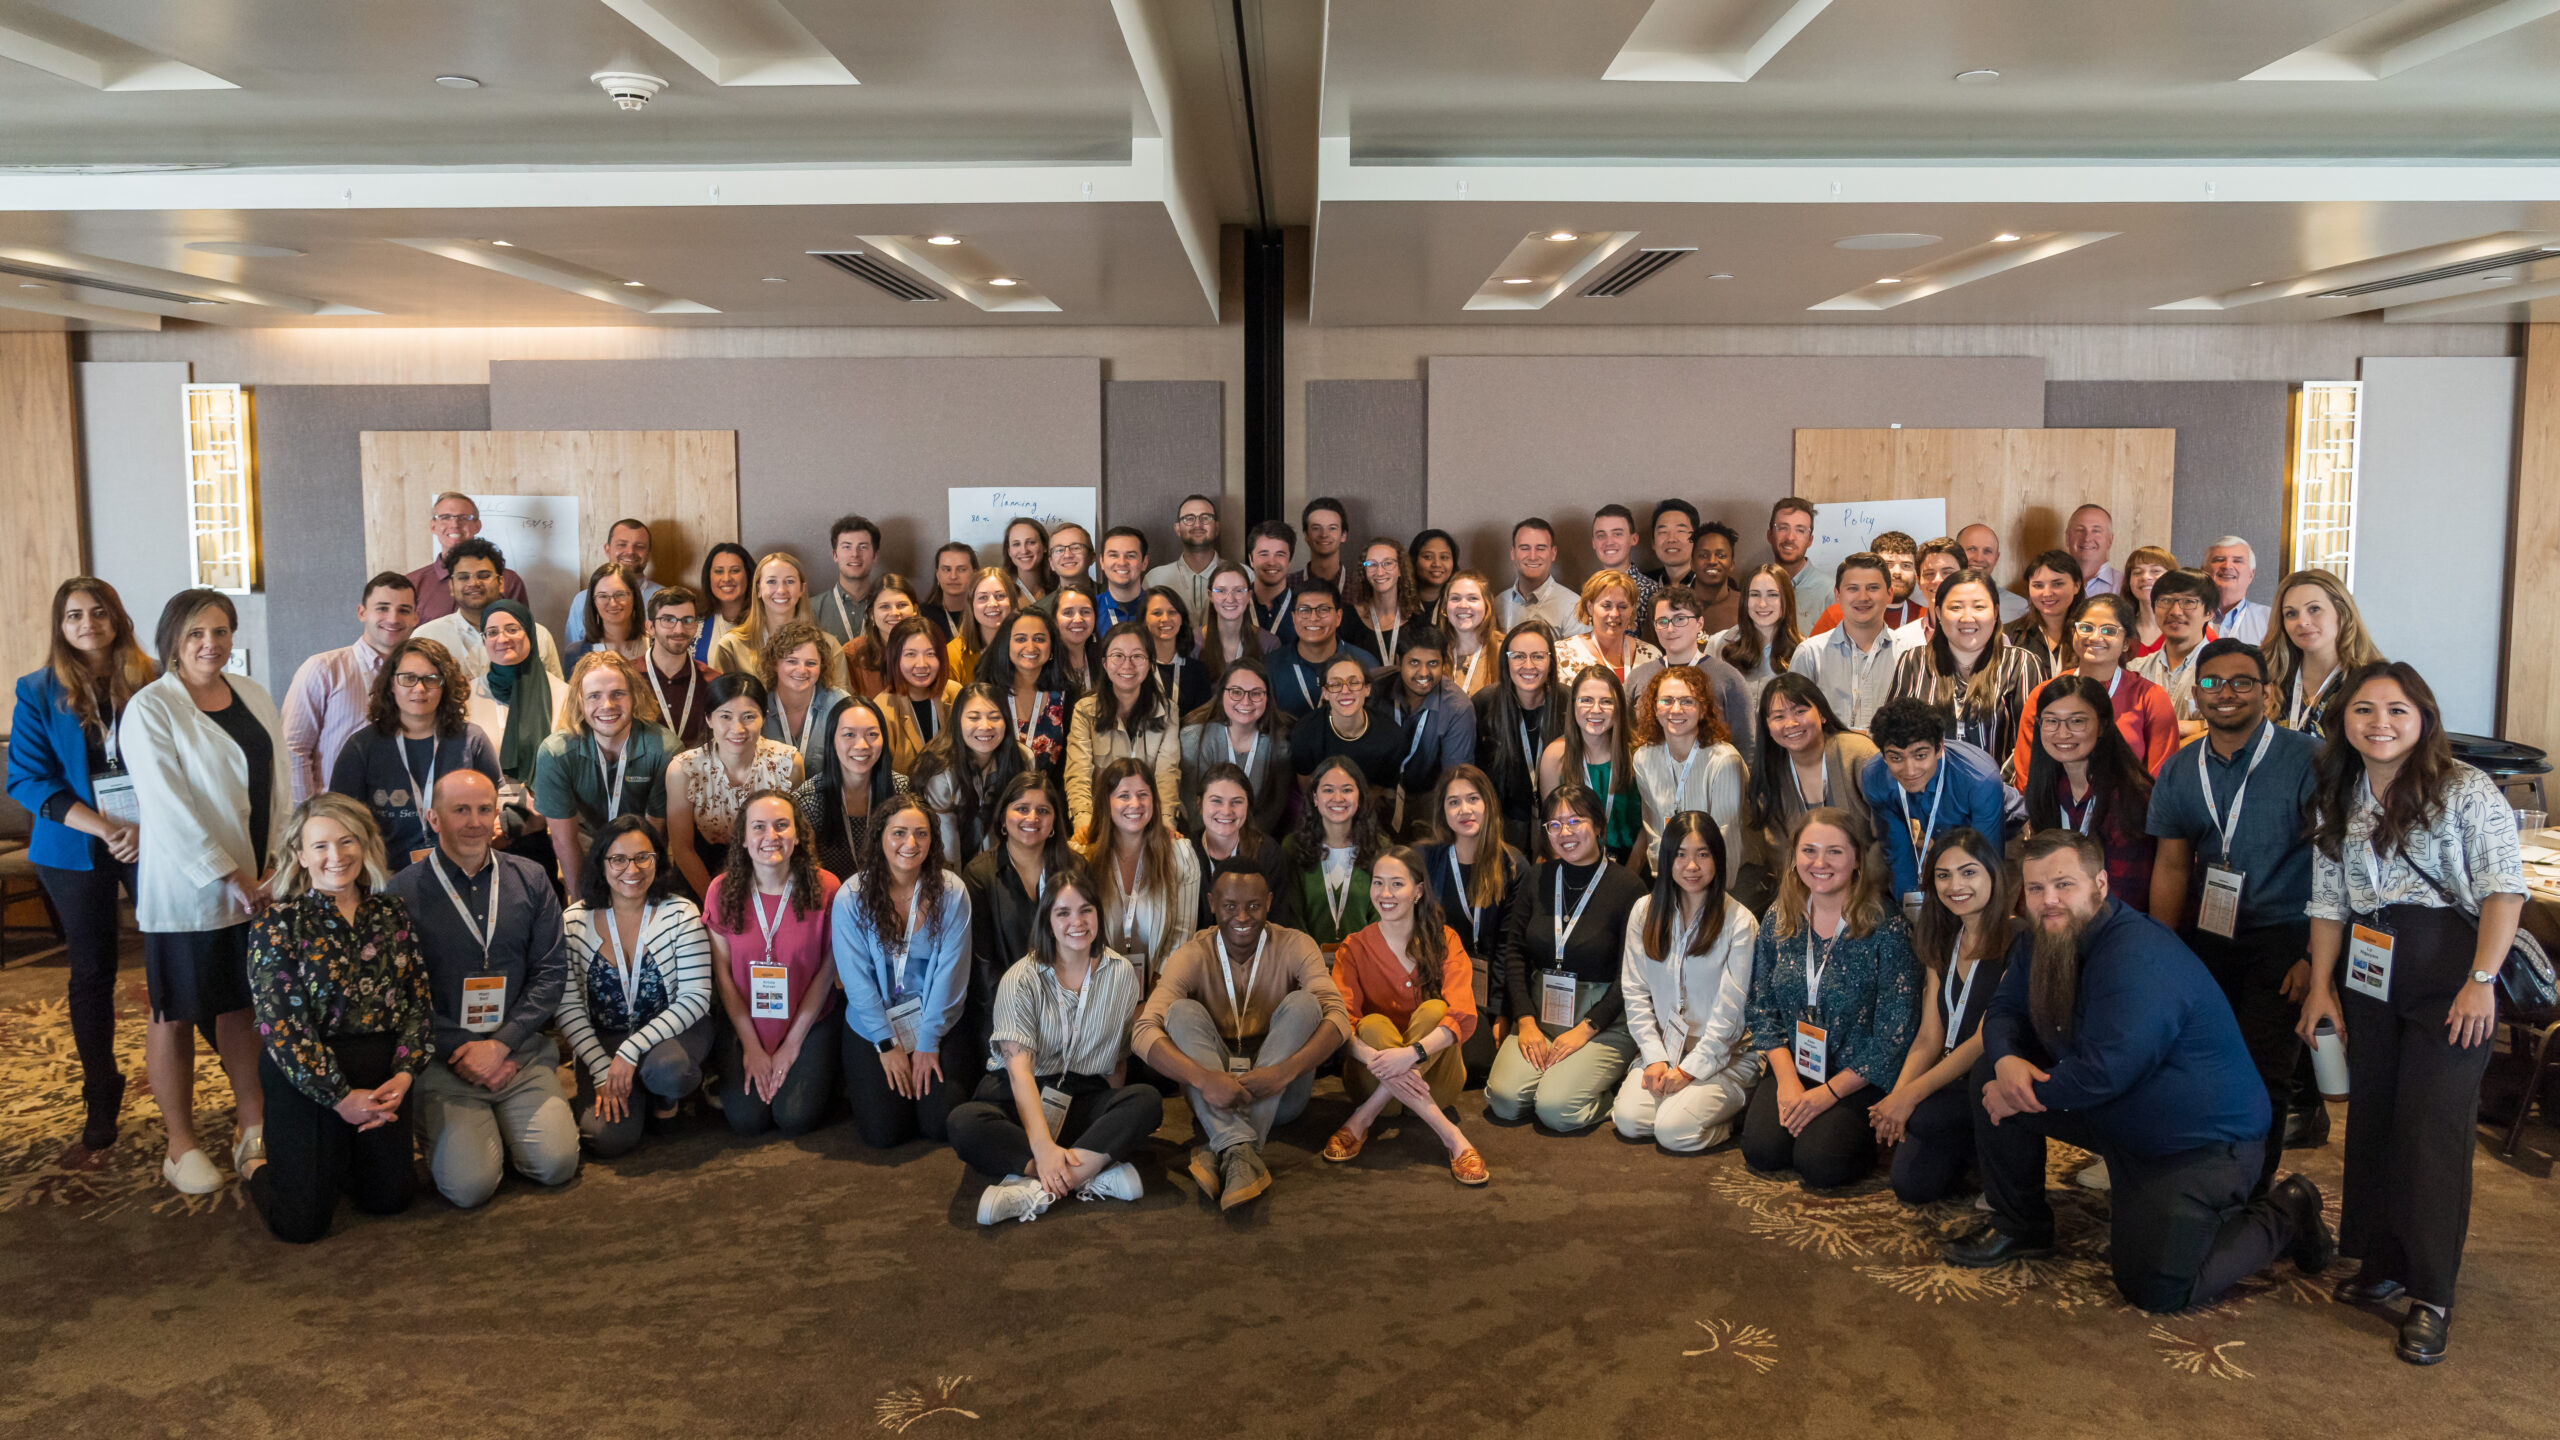 Group photo of attendees from the SPARK Summit.